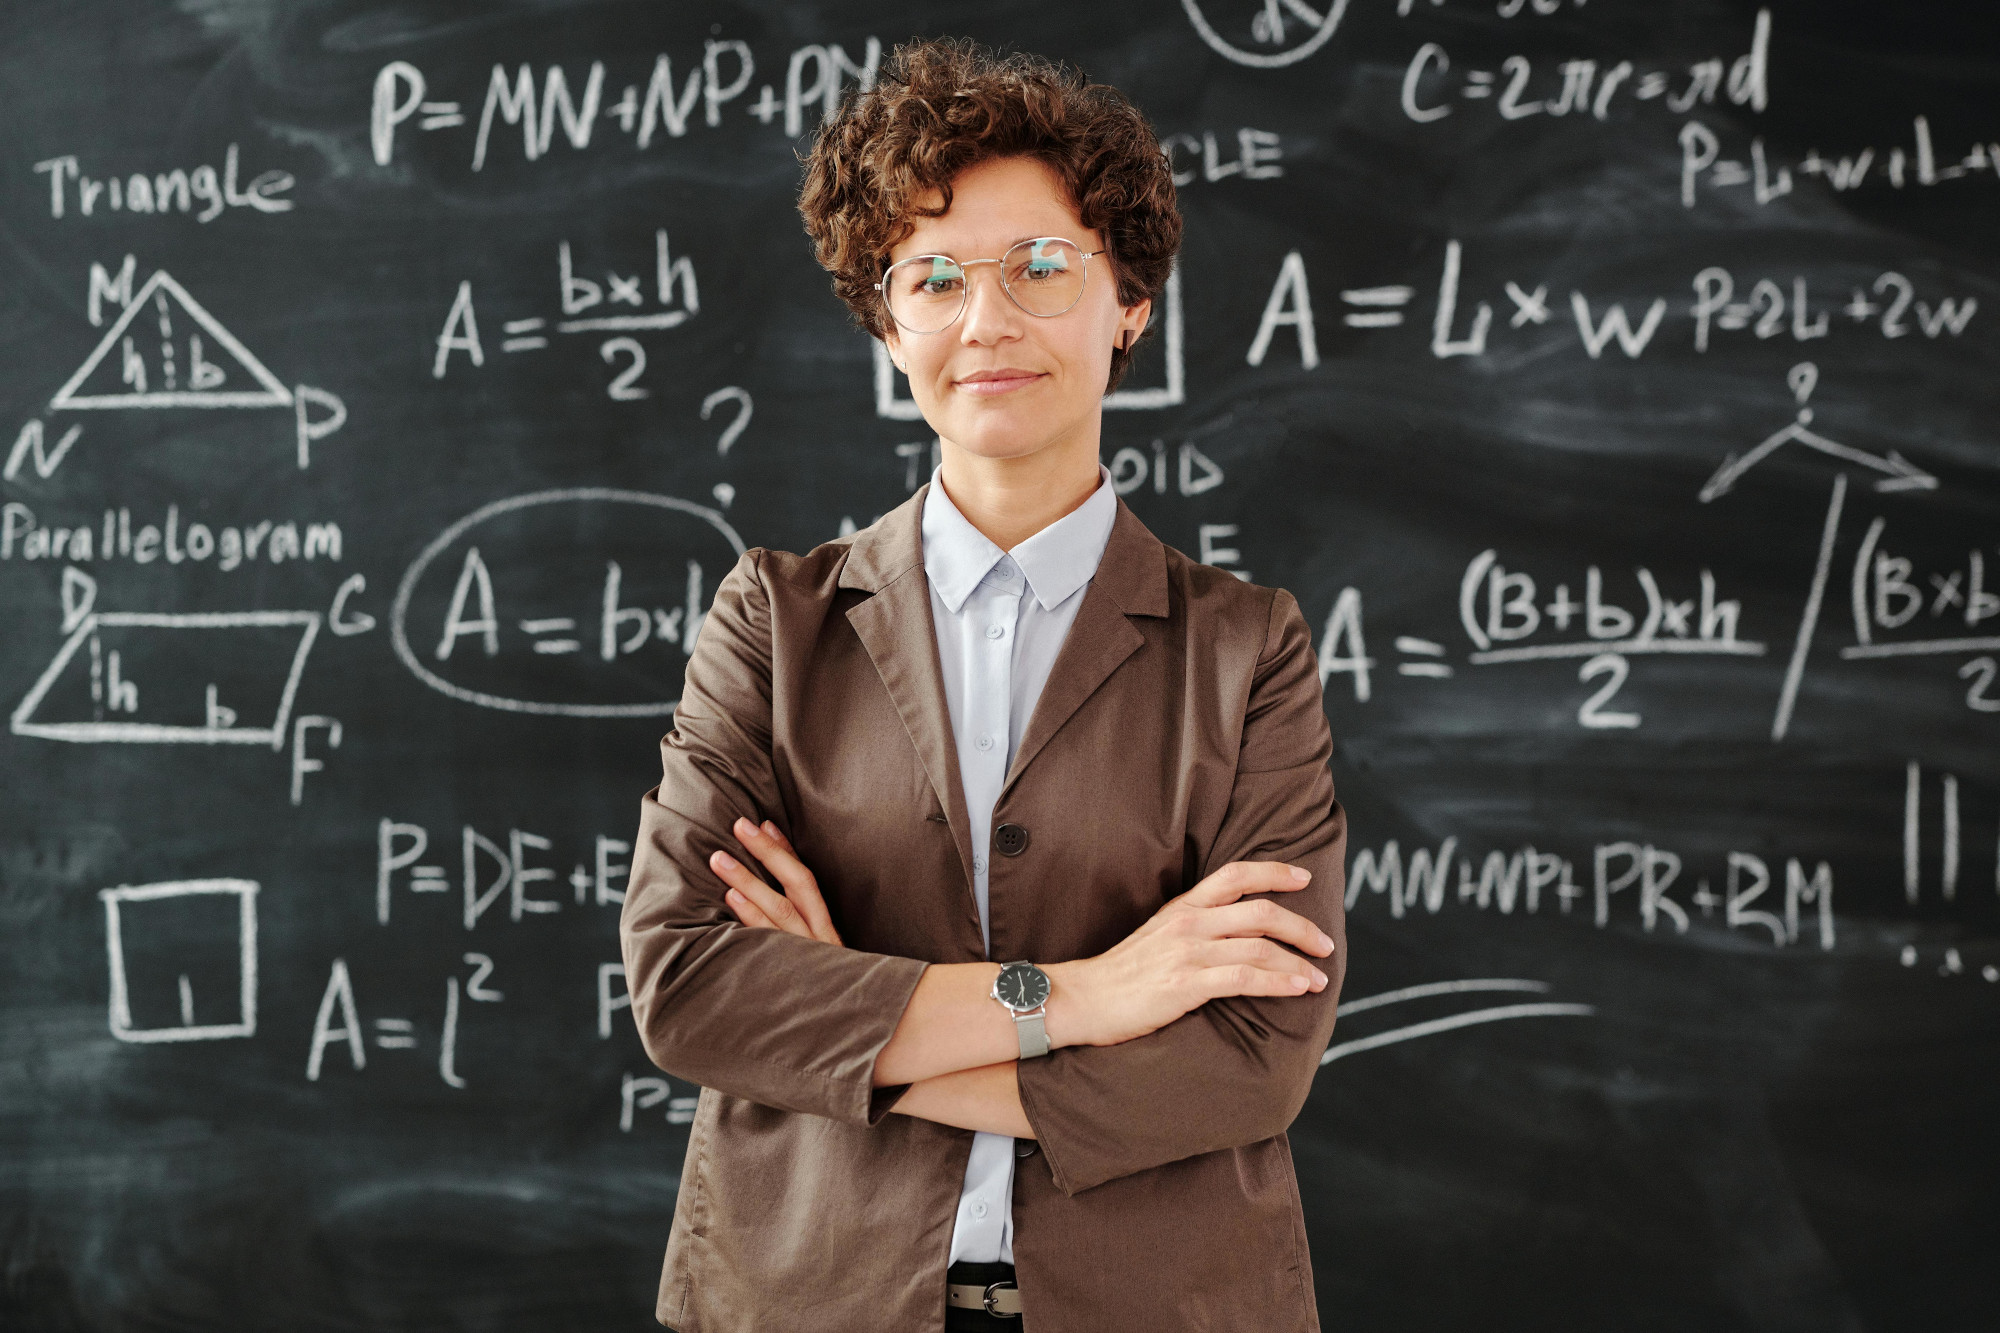 A female teacher standing in front of a blackboard which features mathematical formulars written with chalk. The teacher stands with crossed arms and is smiling.